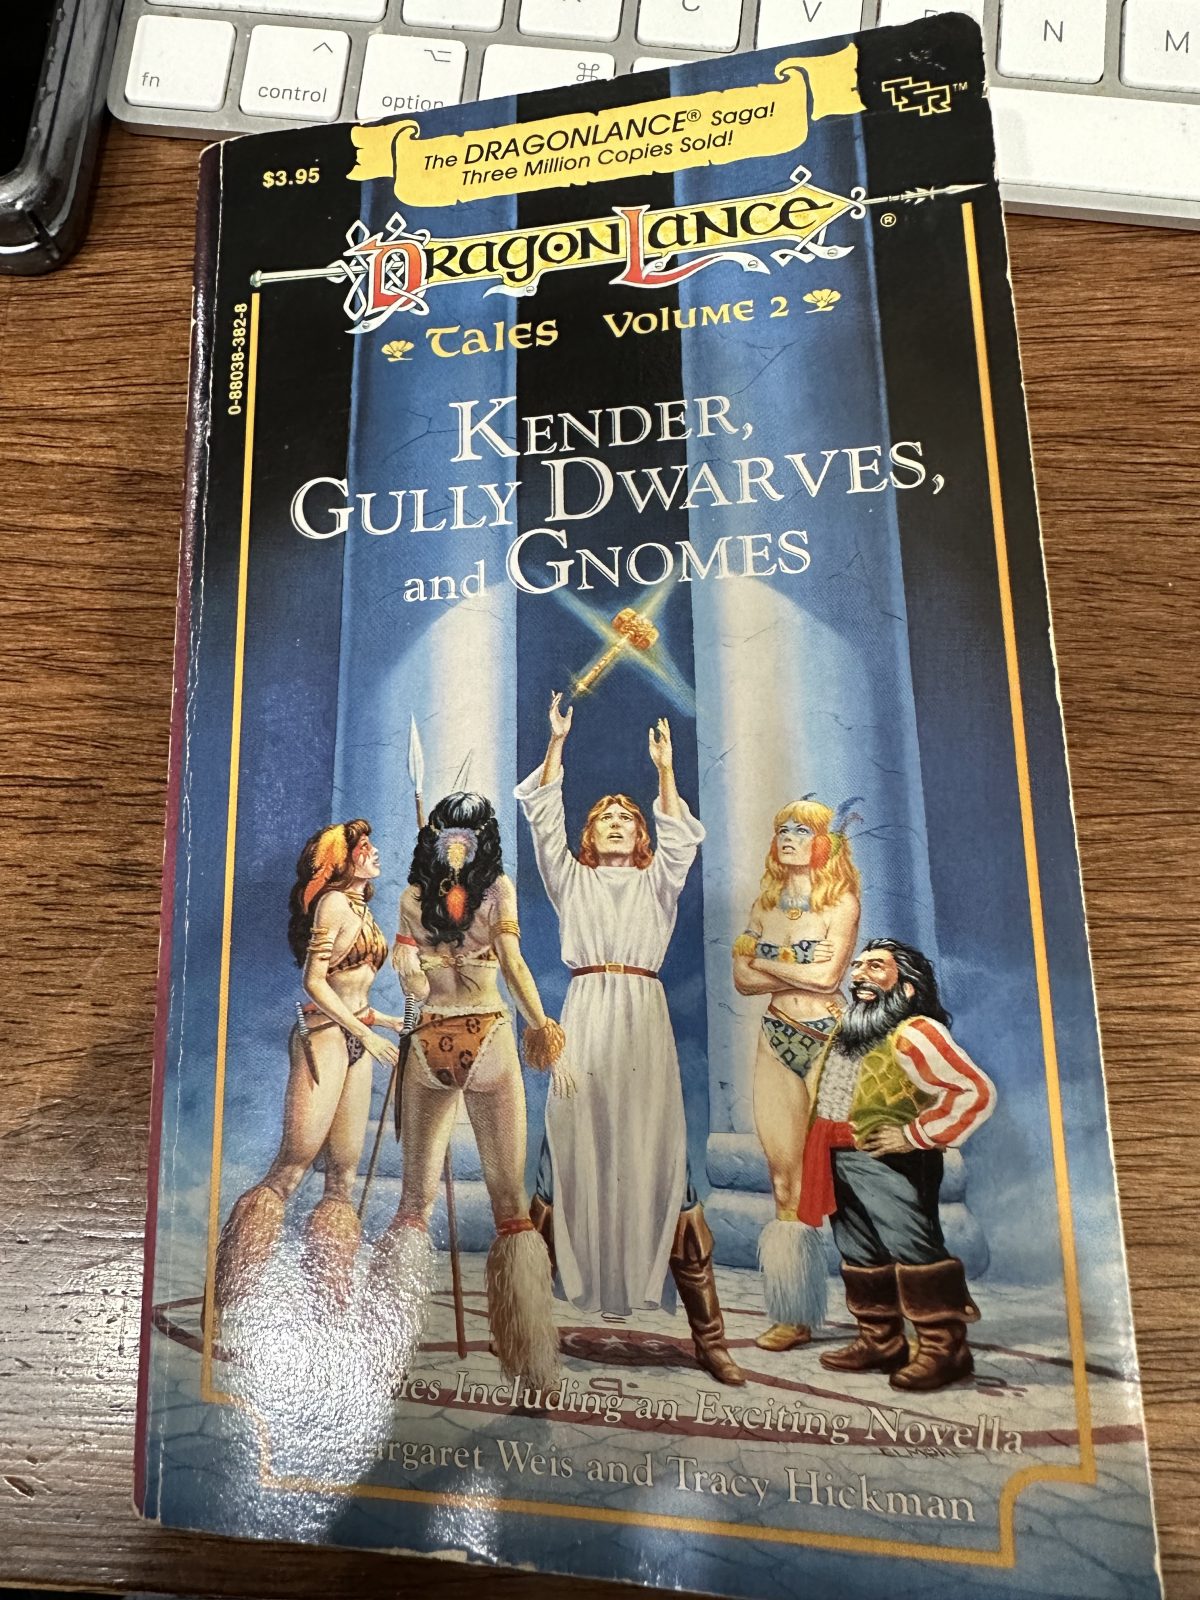 DragonLance Tales Volume 2: Kender, Gully Dwarves and Gnomes